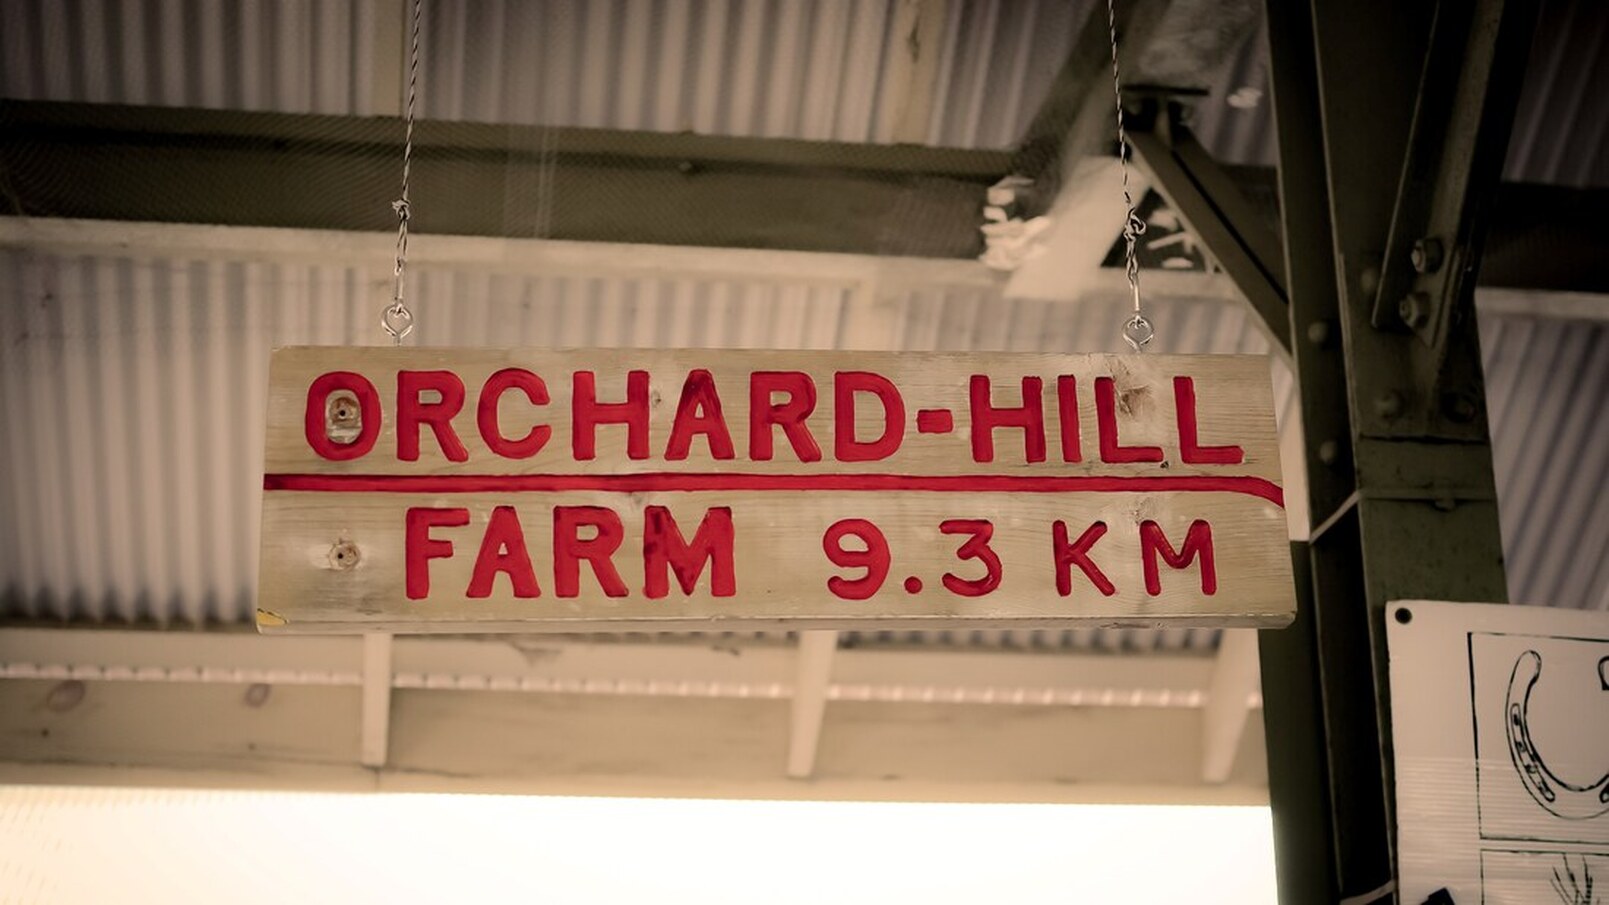 Here is a sign for Orchard Hill Farm. The lettering is painted in bridge red and is painted on a wood plank. It is hanging from the ceiling of the Horton Farmers' Market pavilion.